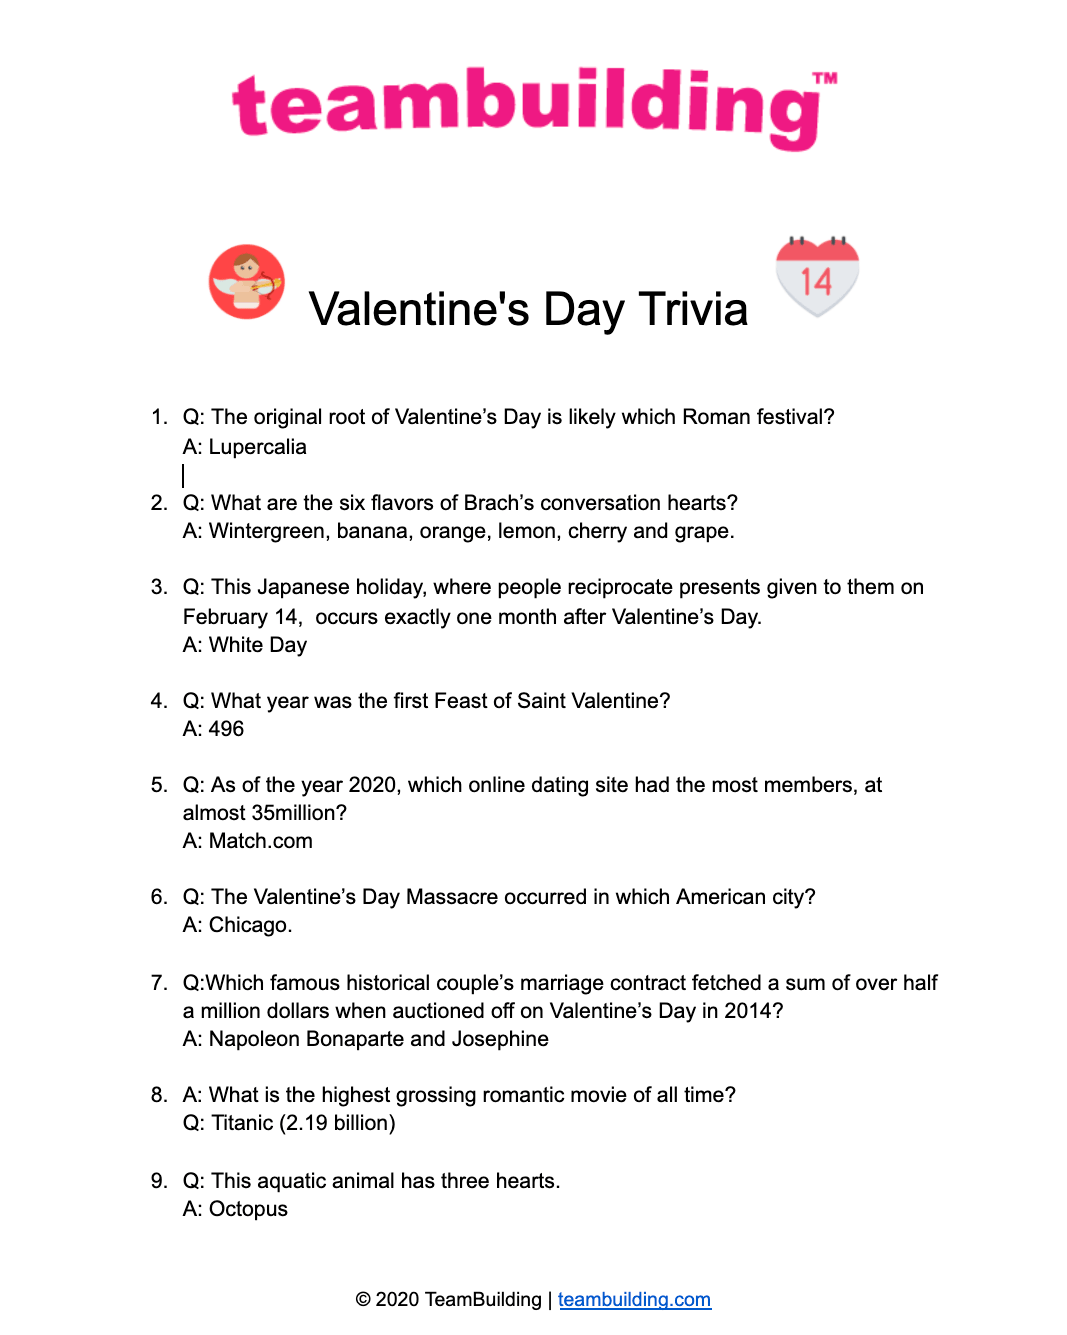 List of Valentine's themed trivia questions